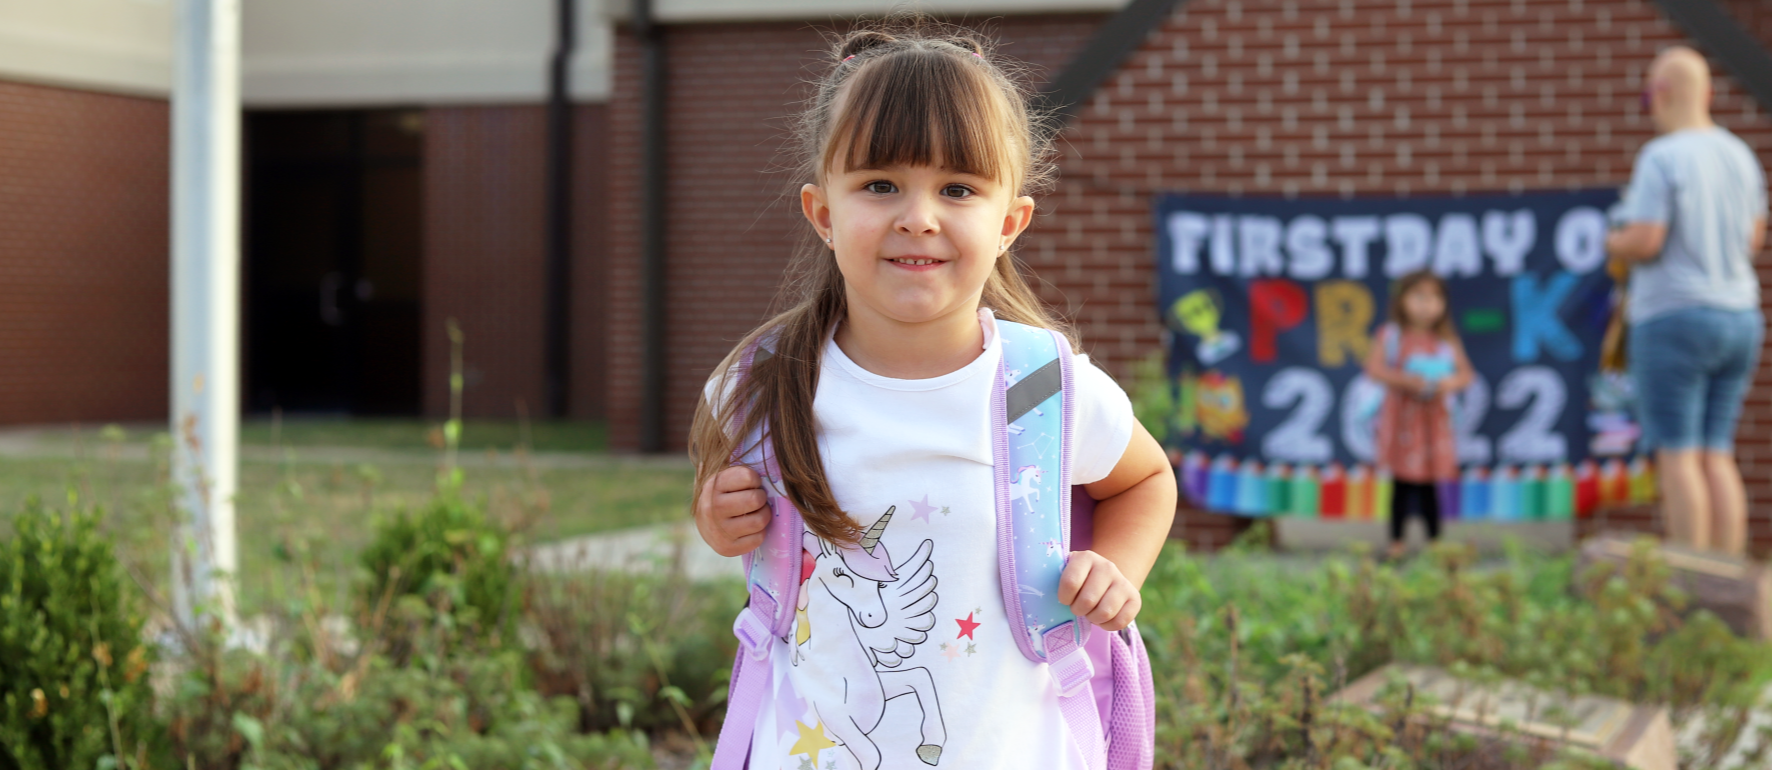 A preschool age girl in a unicorn shirt smiling at the camera on the first day of school